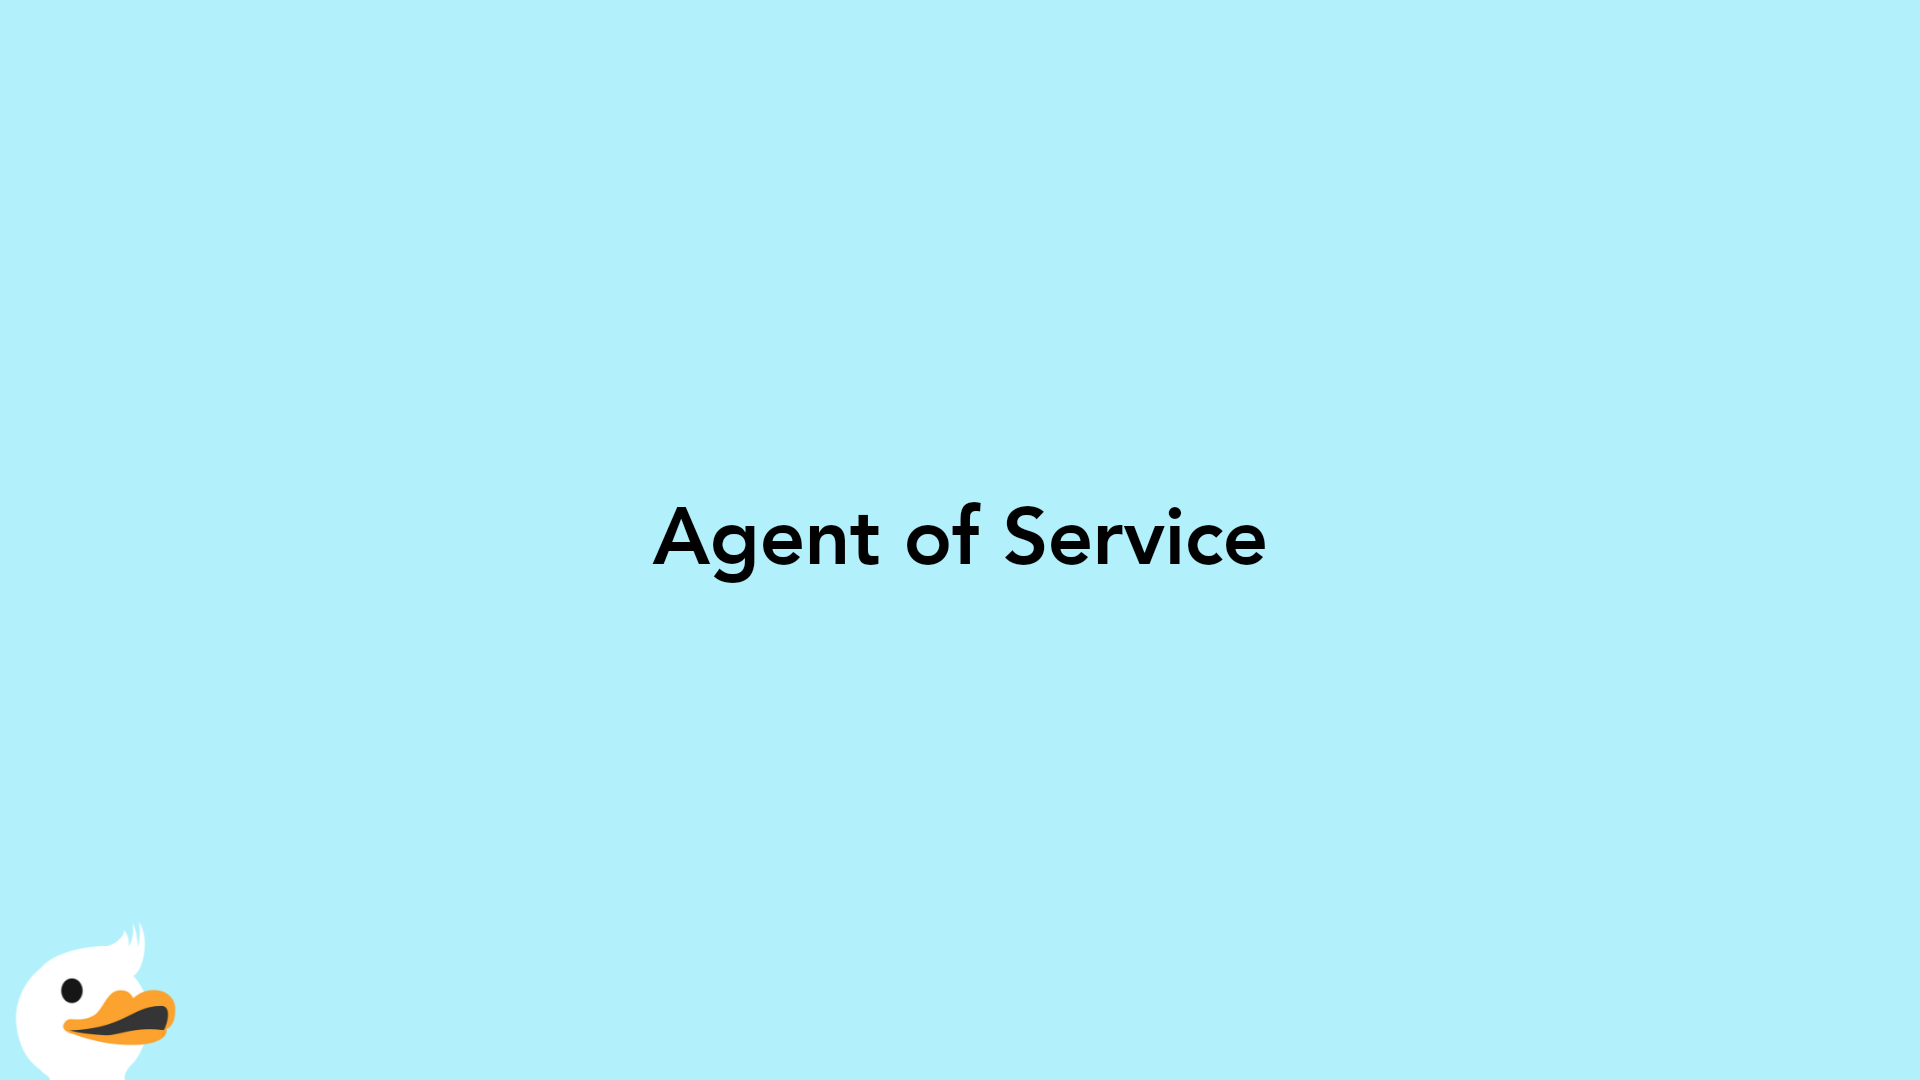 Agent of Service